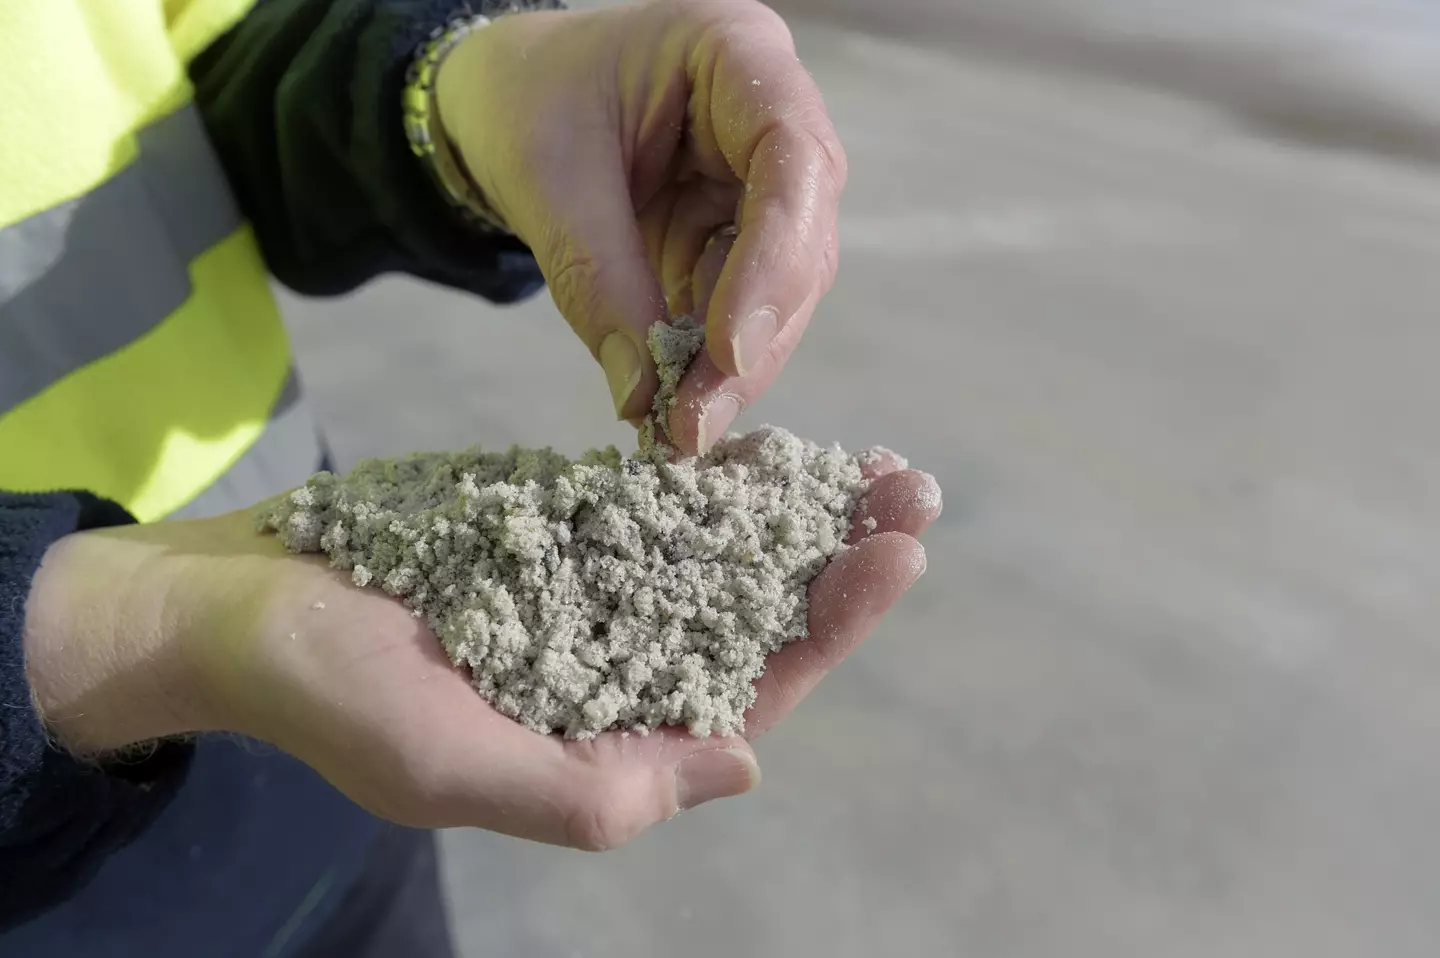 Lithium gets the name 'white gold' from its white, sand-like appearance.